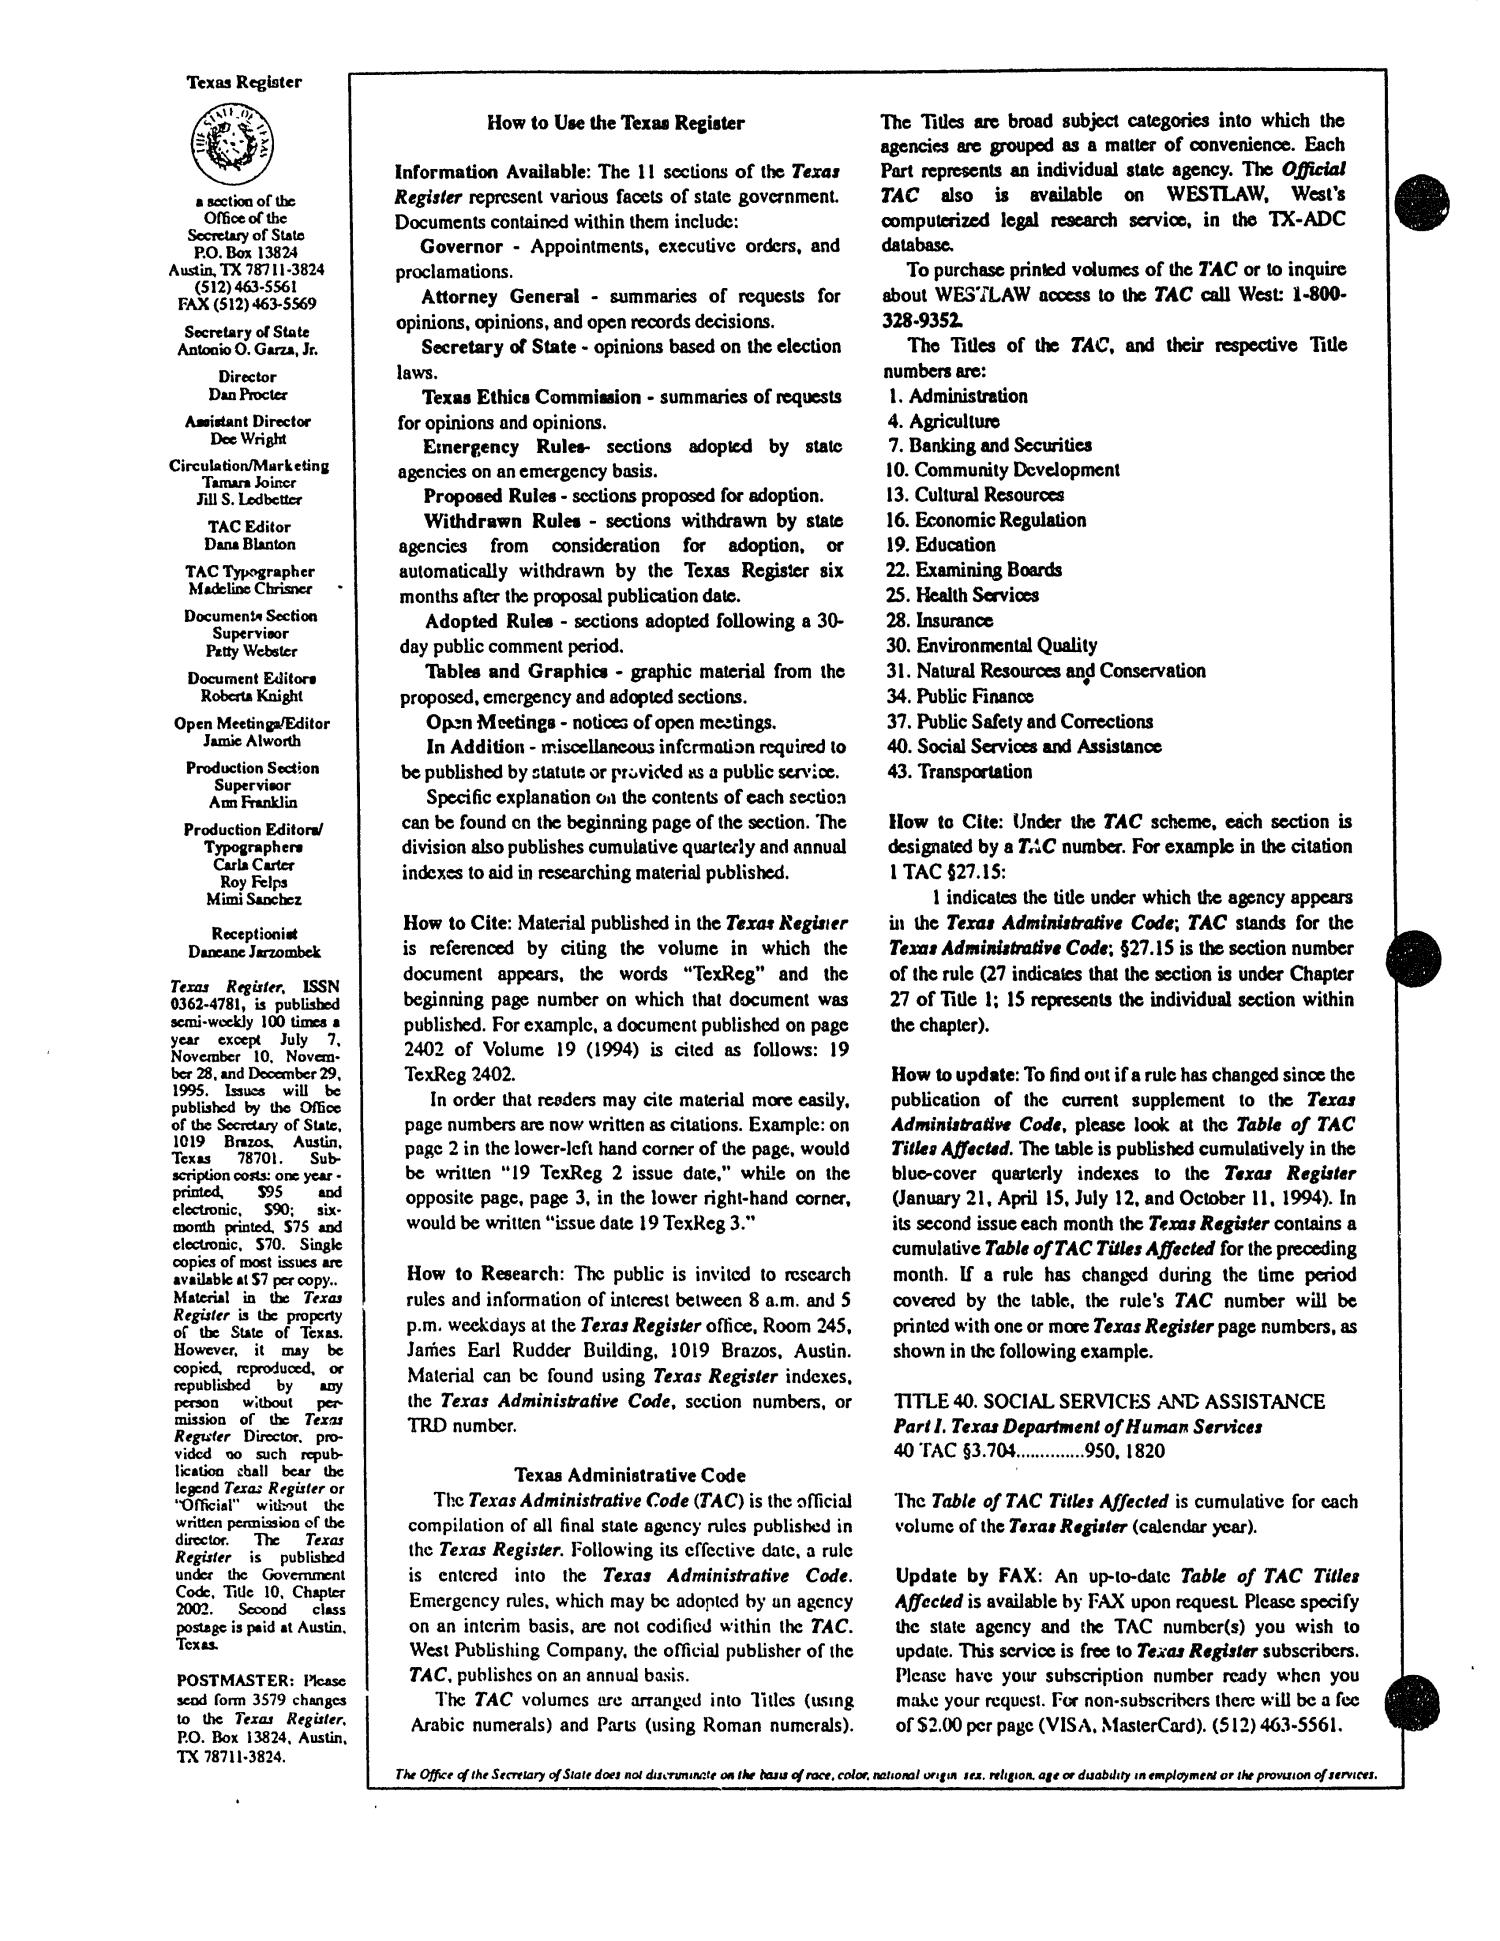 Texas Register, Volume 20, Number 29, Part II, Pages 2821-2969, April 18, 1995
                                                
                                                    None
                                                